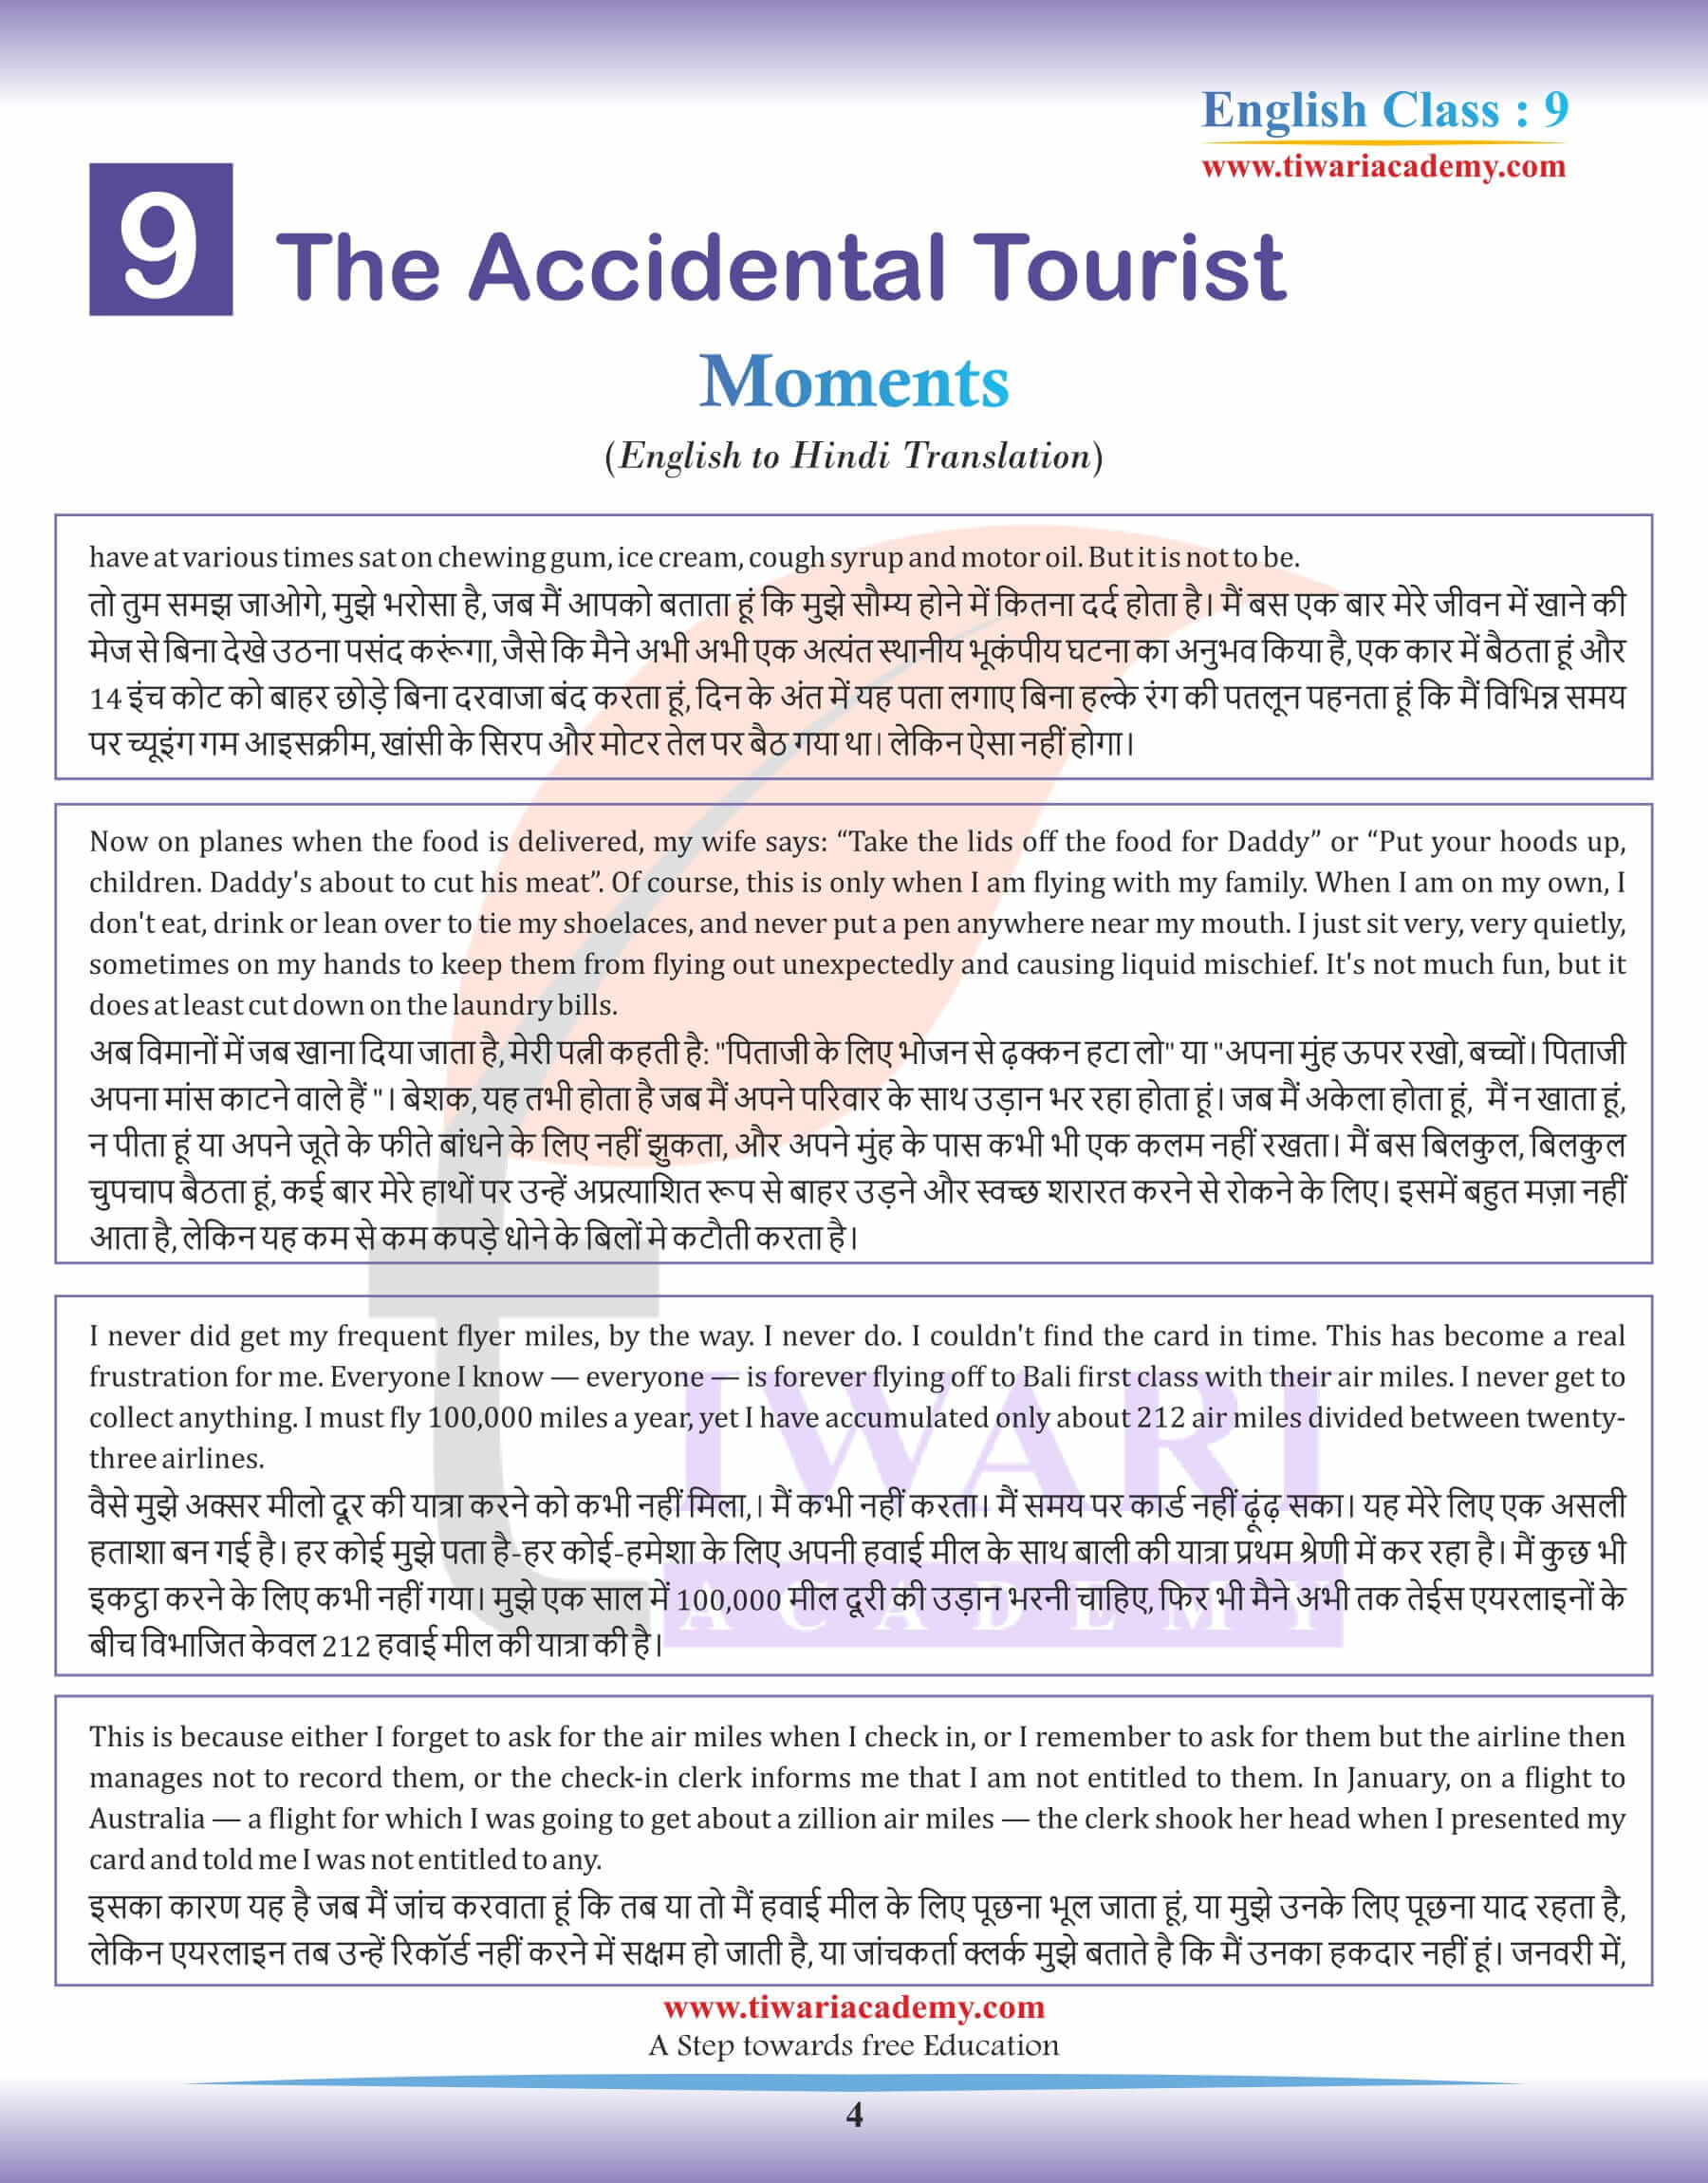 Moments Chapter 9 the Accidental Tourist